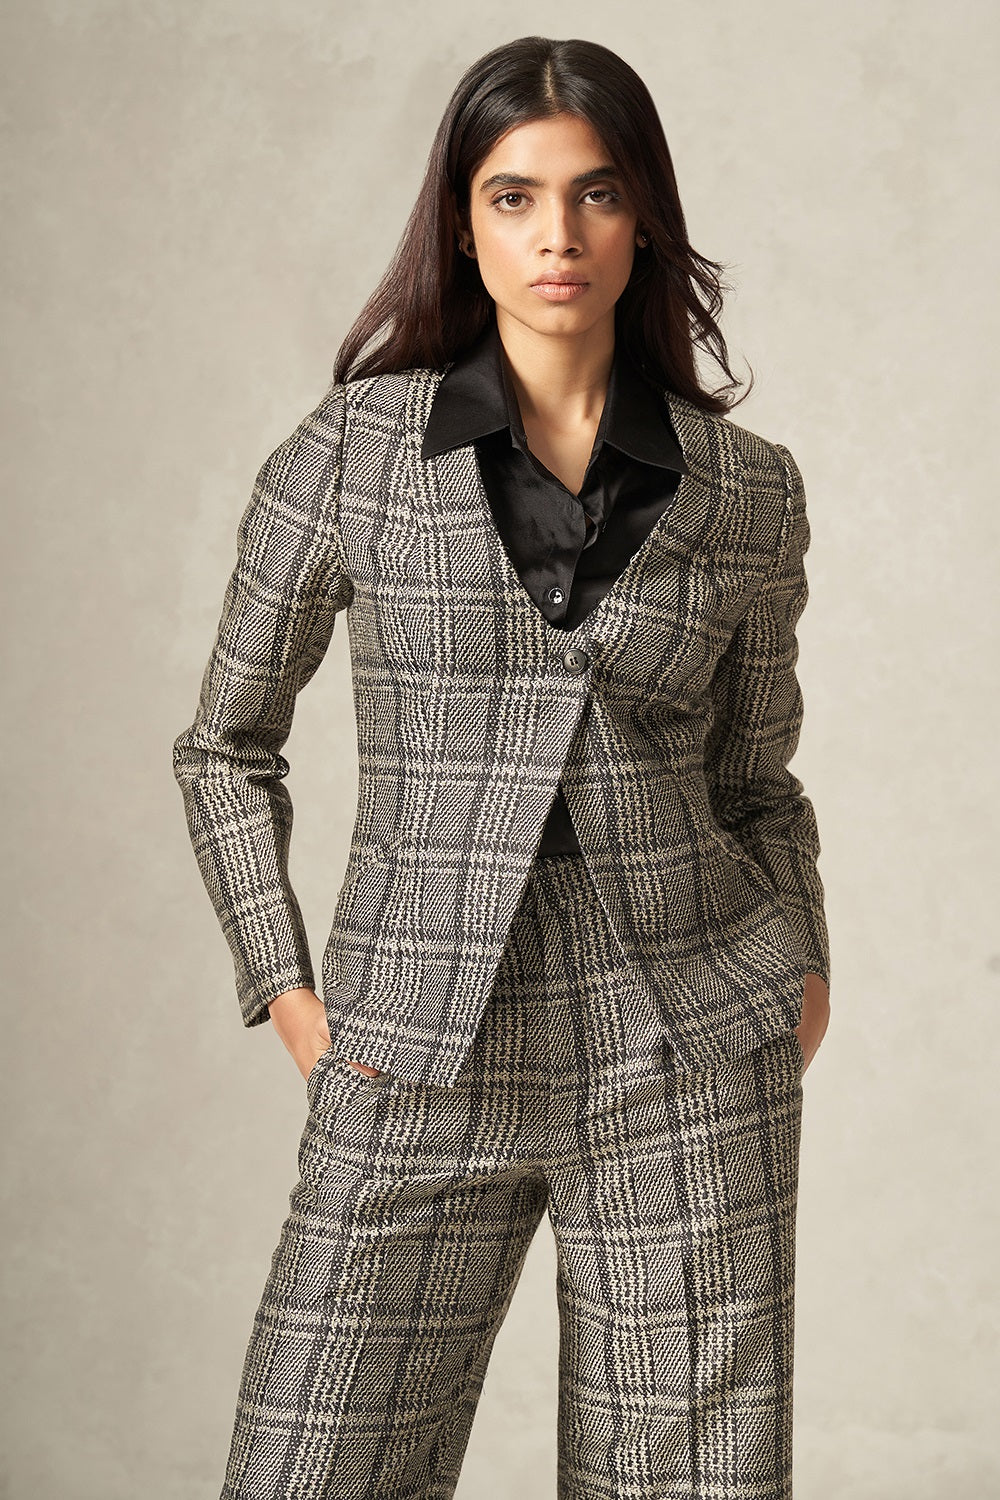 Black and White Pure Katan Silk Handwoven Plaid Patterned Jacket